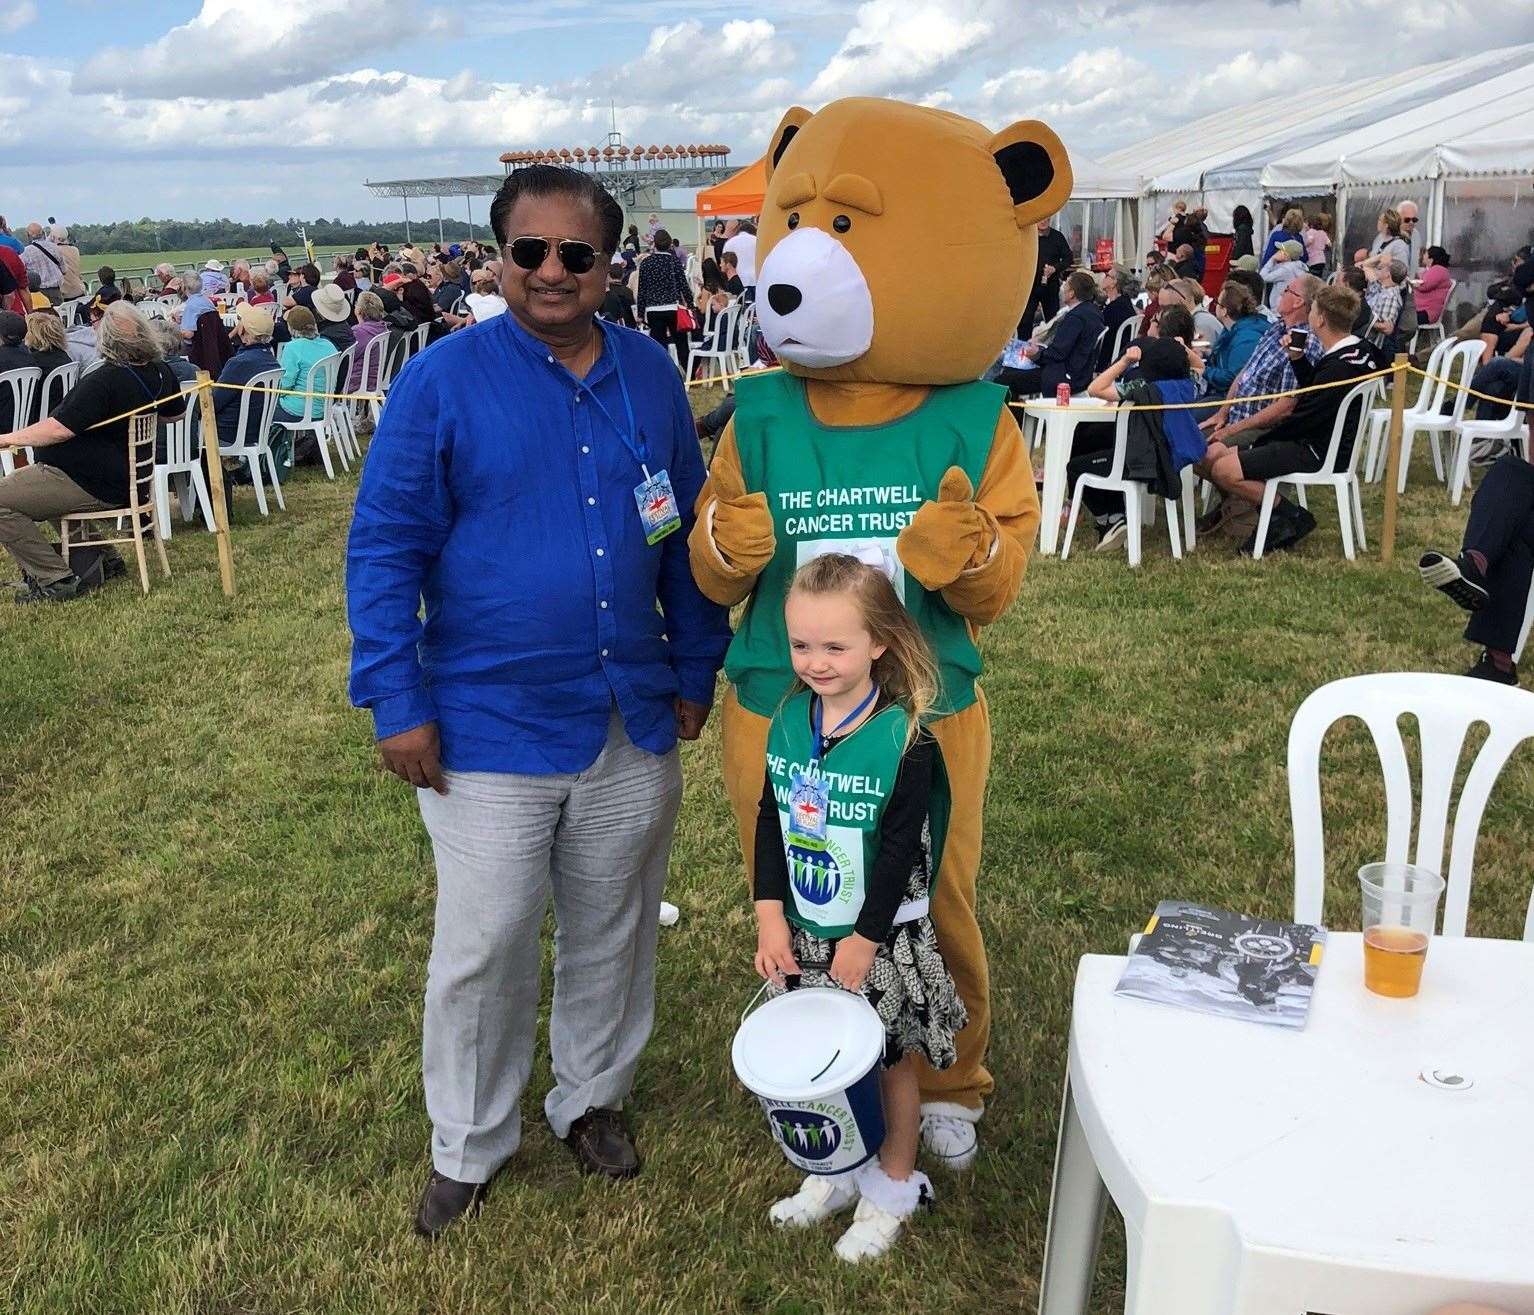 Prakash Sinha attending a fund-raising event for the Chartwell Cancer Trust in August 2019